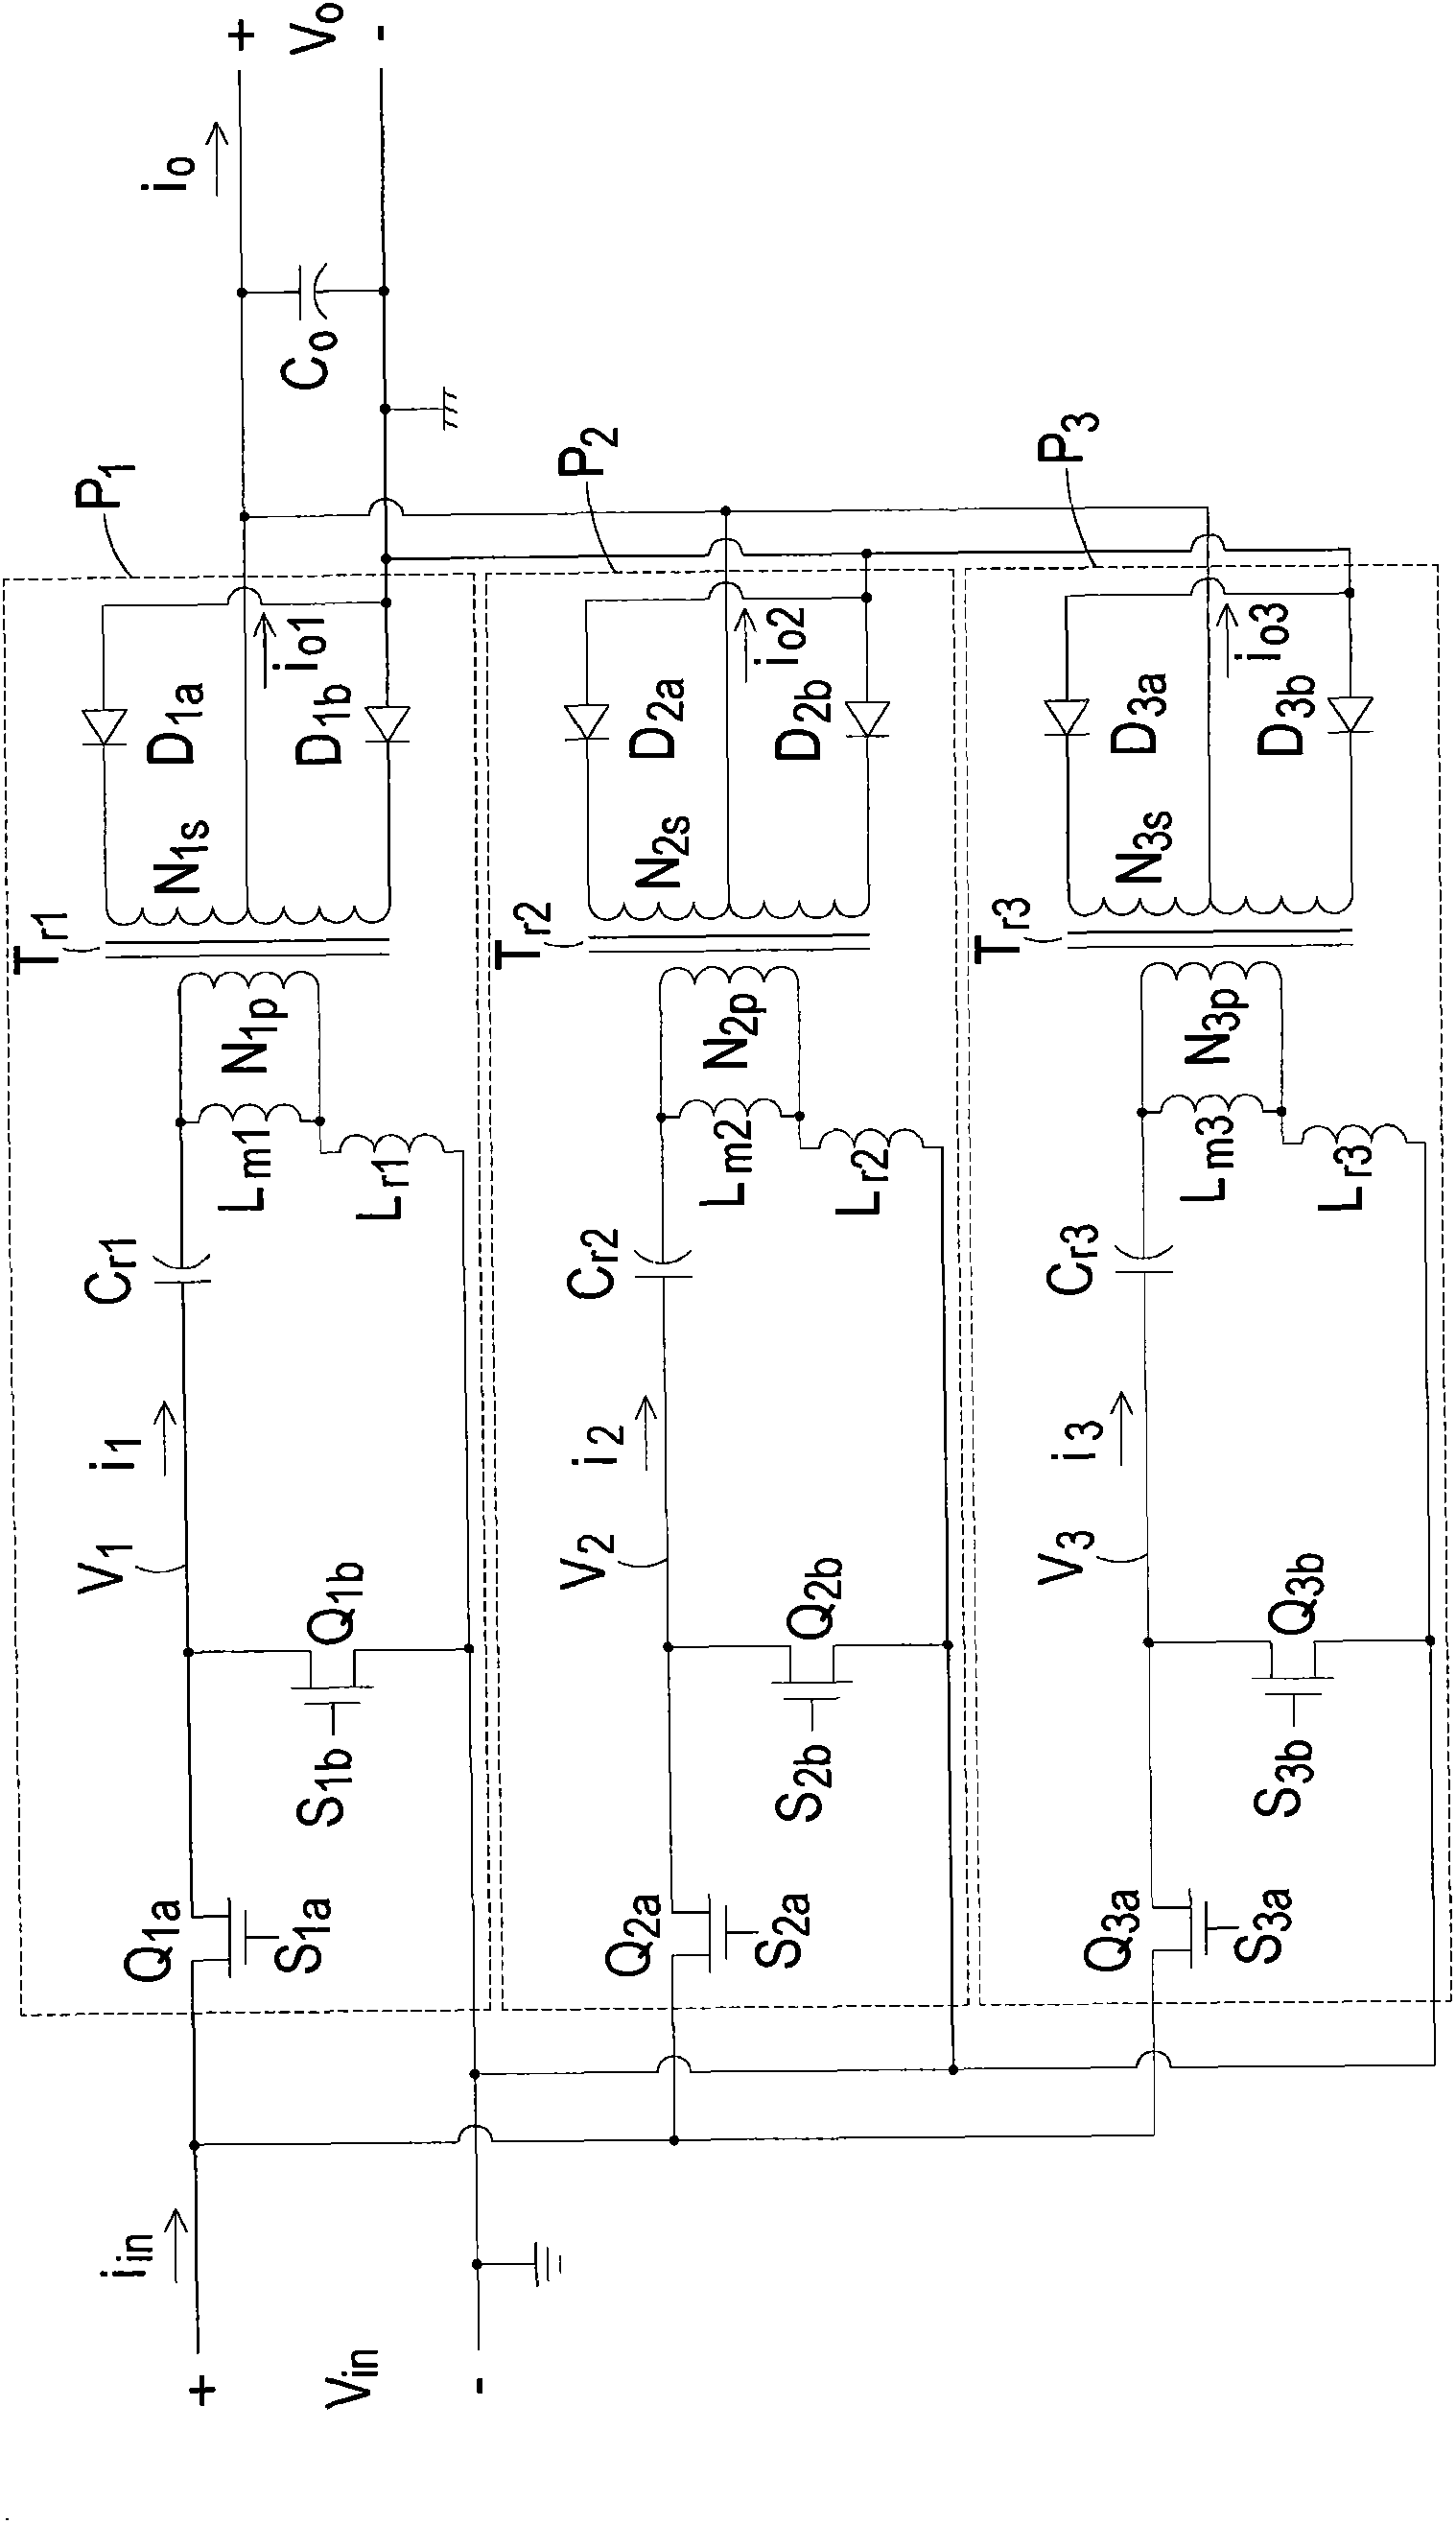 Multiphase switch power supply switching circuit